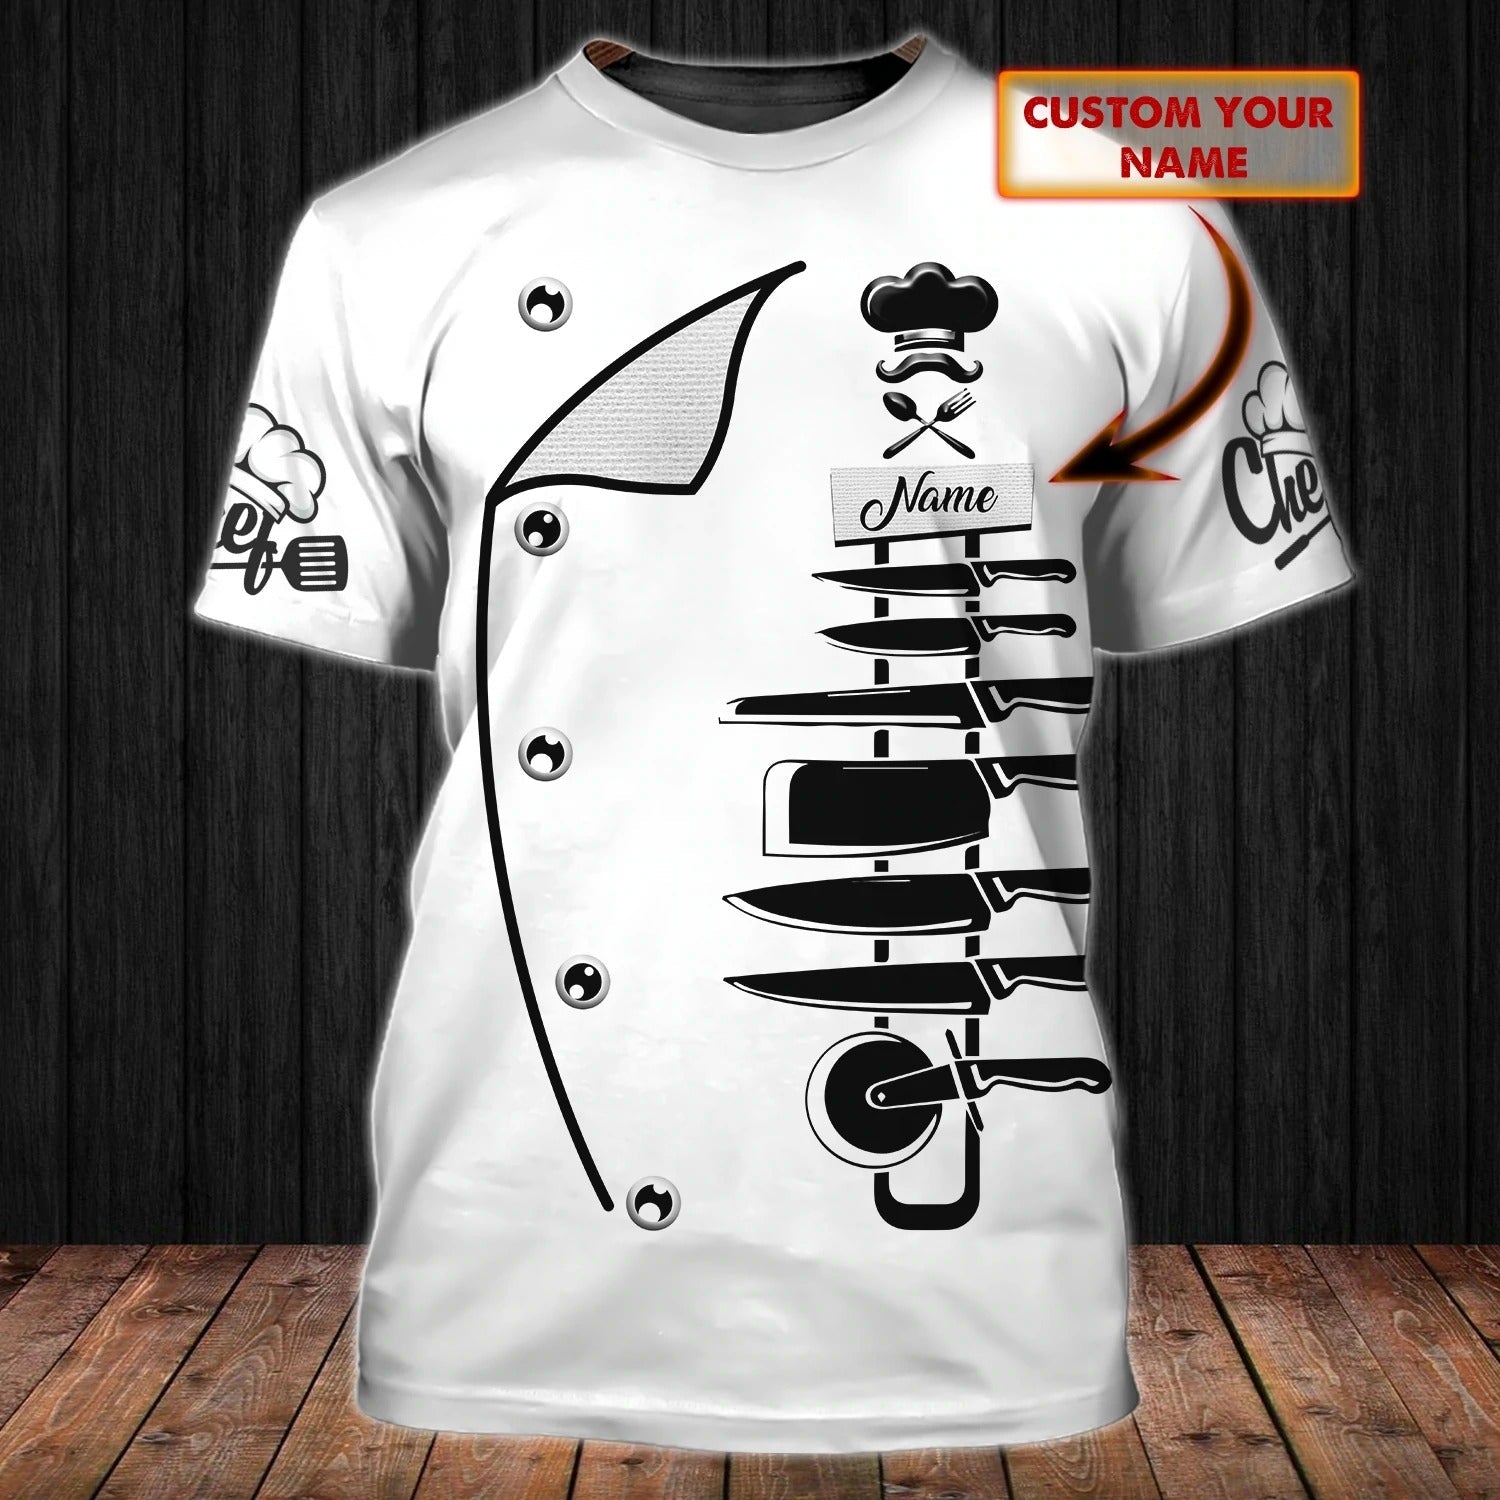 Custom 3D All Over Print Shirt For Chef/ Master Chef Tshirt/ Sublimation Cooker Shirt/ Cooking 3D Shirts